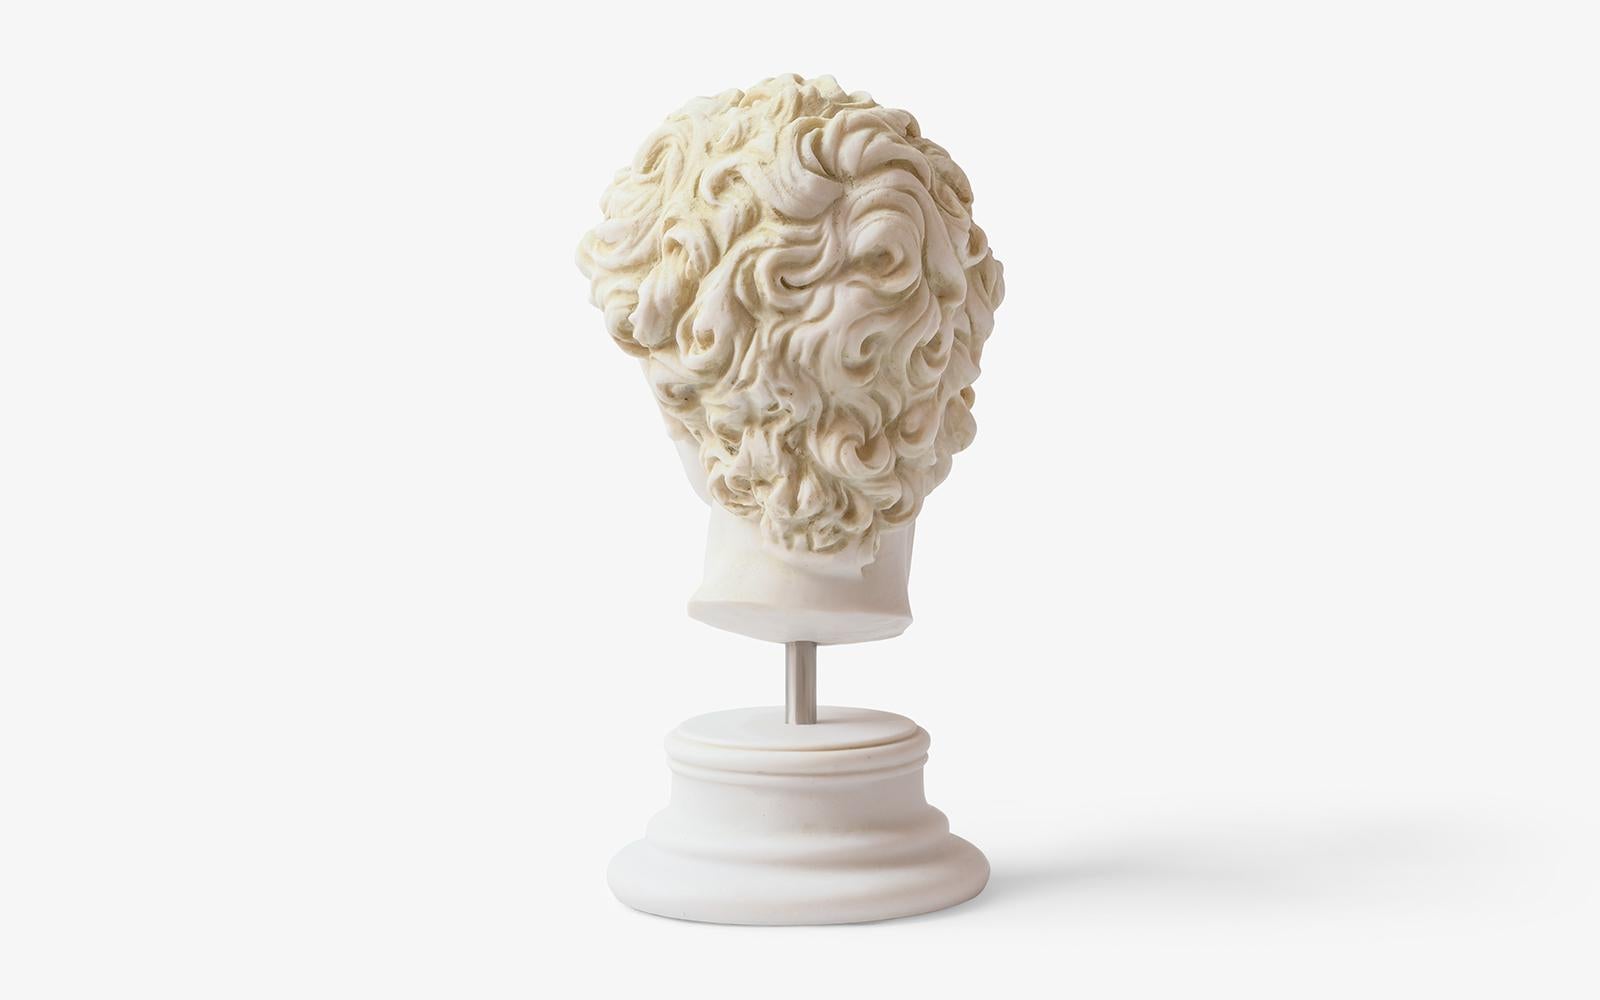 
The David bust by Michelangelo is a high-quality replica of the famous David sculpture created by the Italian artist during the Renaissance period. This item is made from pressed marble powder and has a height of 11.8 inches (30 cm) and a weight of